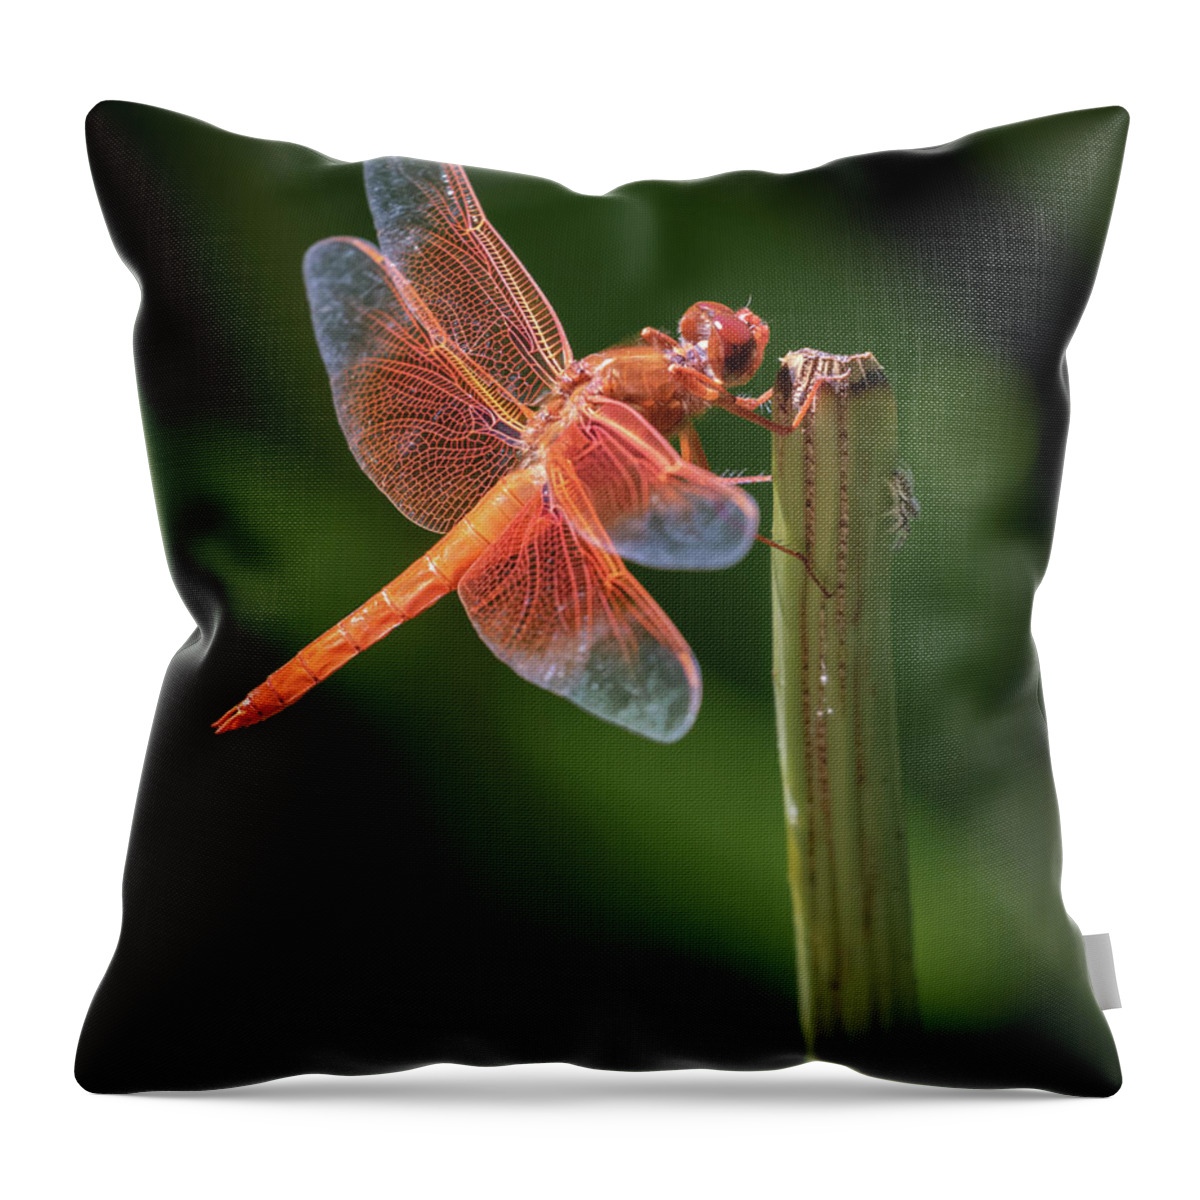 Orange Throw Pillow featuring the photograph Hanging Out Together by Gary Geddes